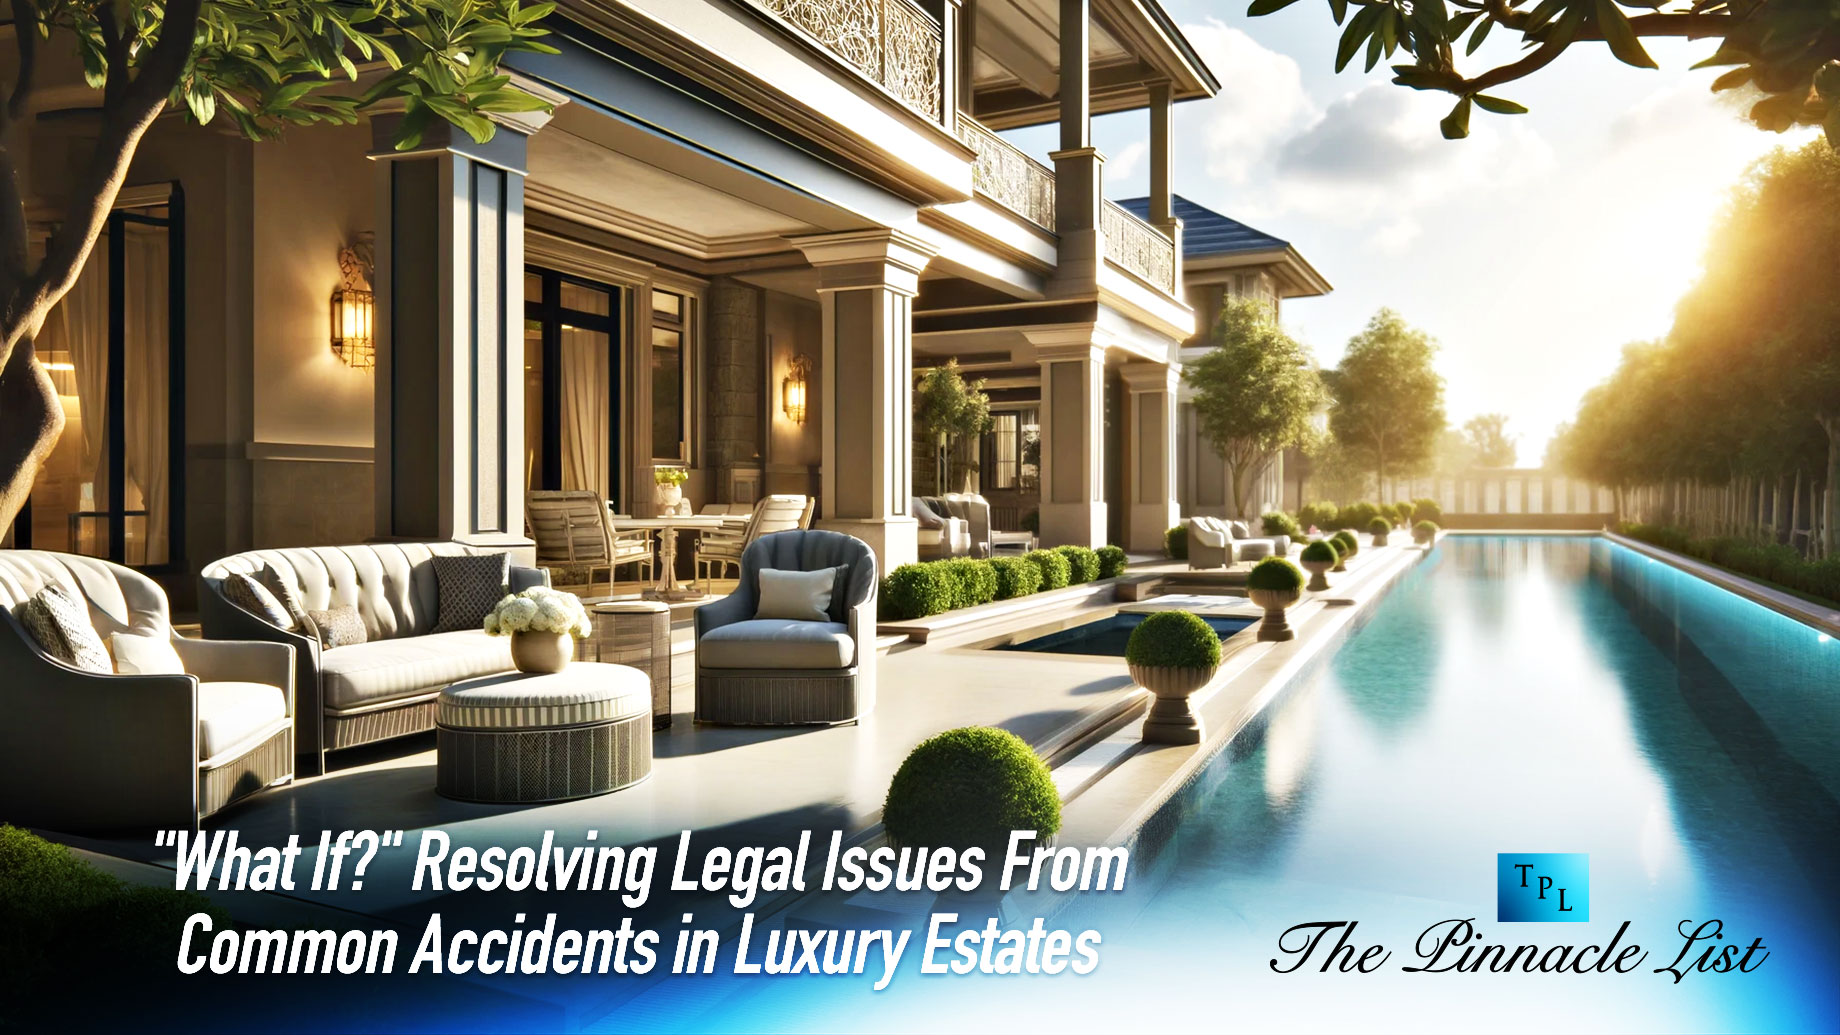 "What If?" Resolving Legal Issues From Common Accidents in Luxury Estates